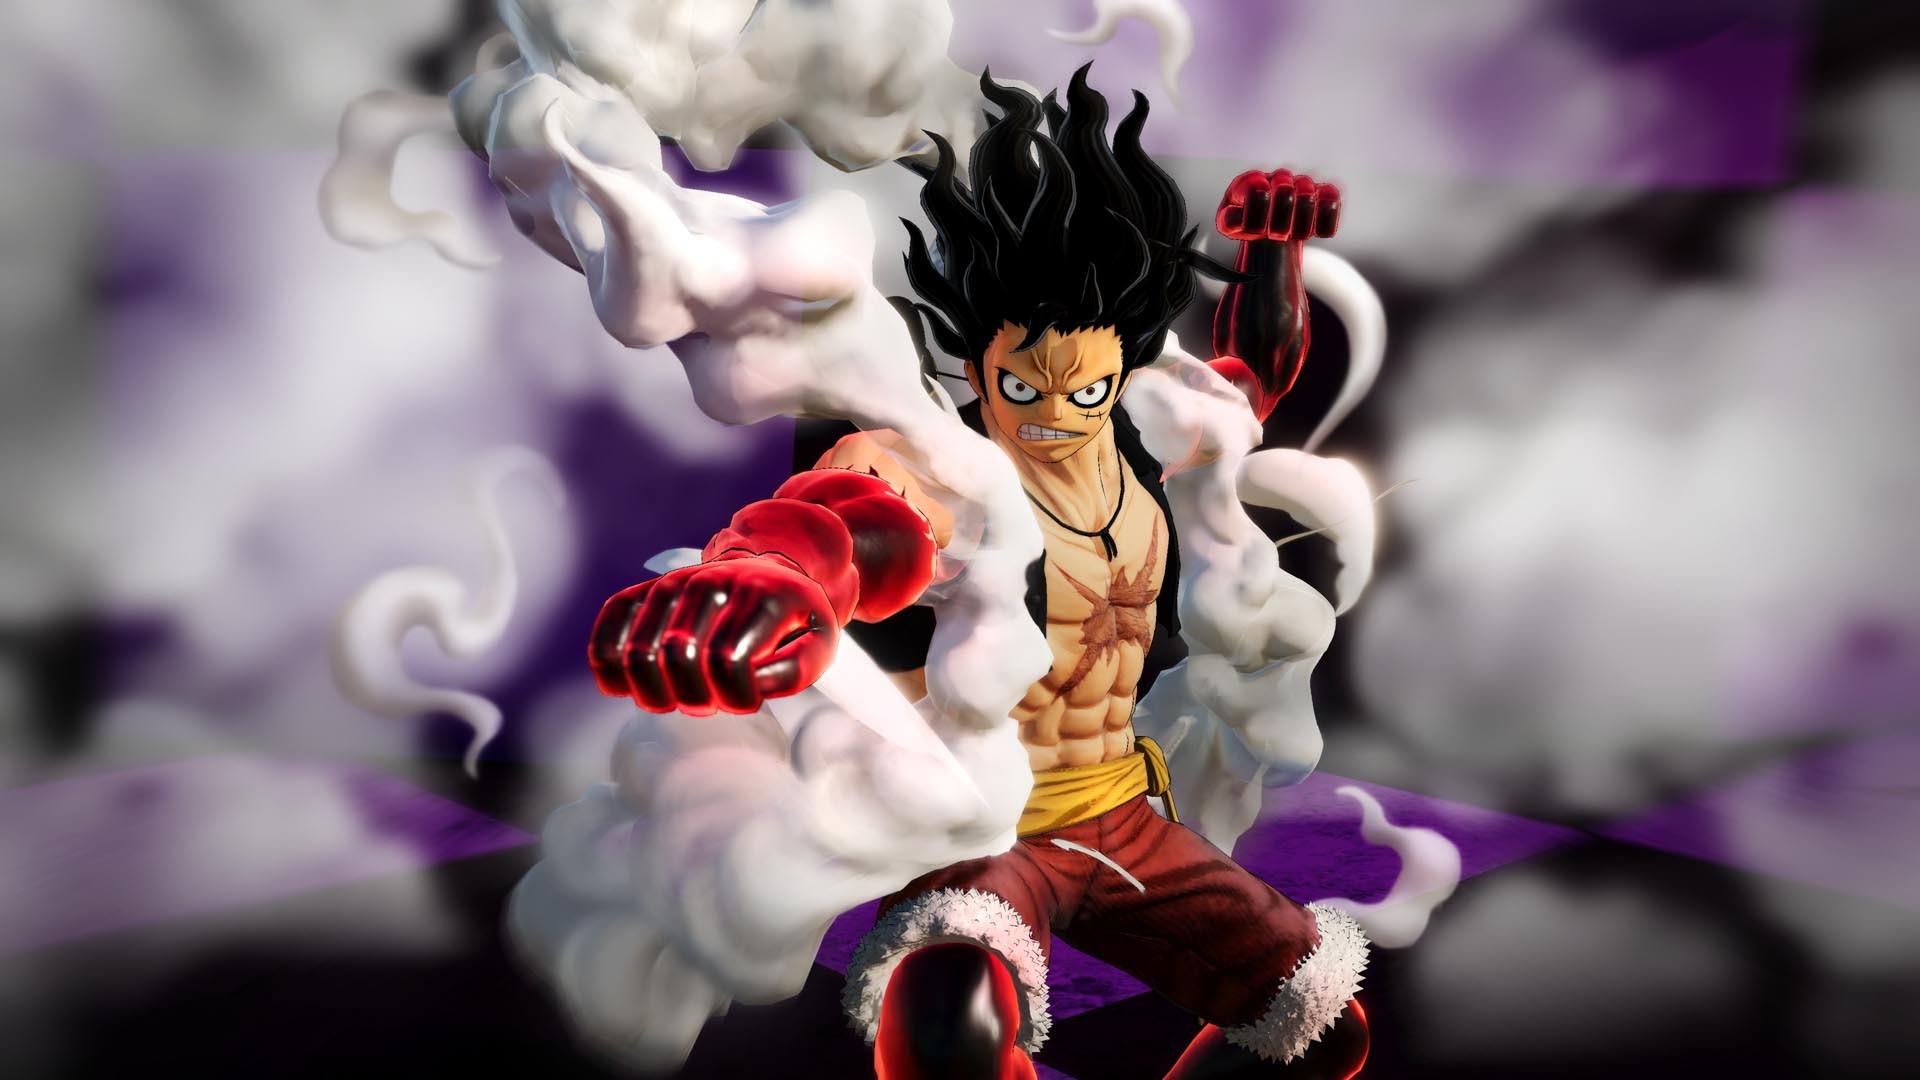 Download One Piece Pirate Warriors 4 Deluxe Edition para pc via torrent